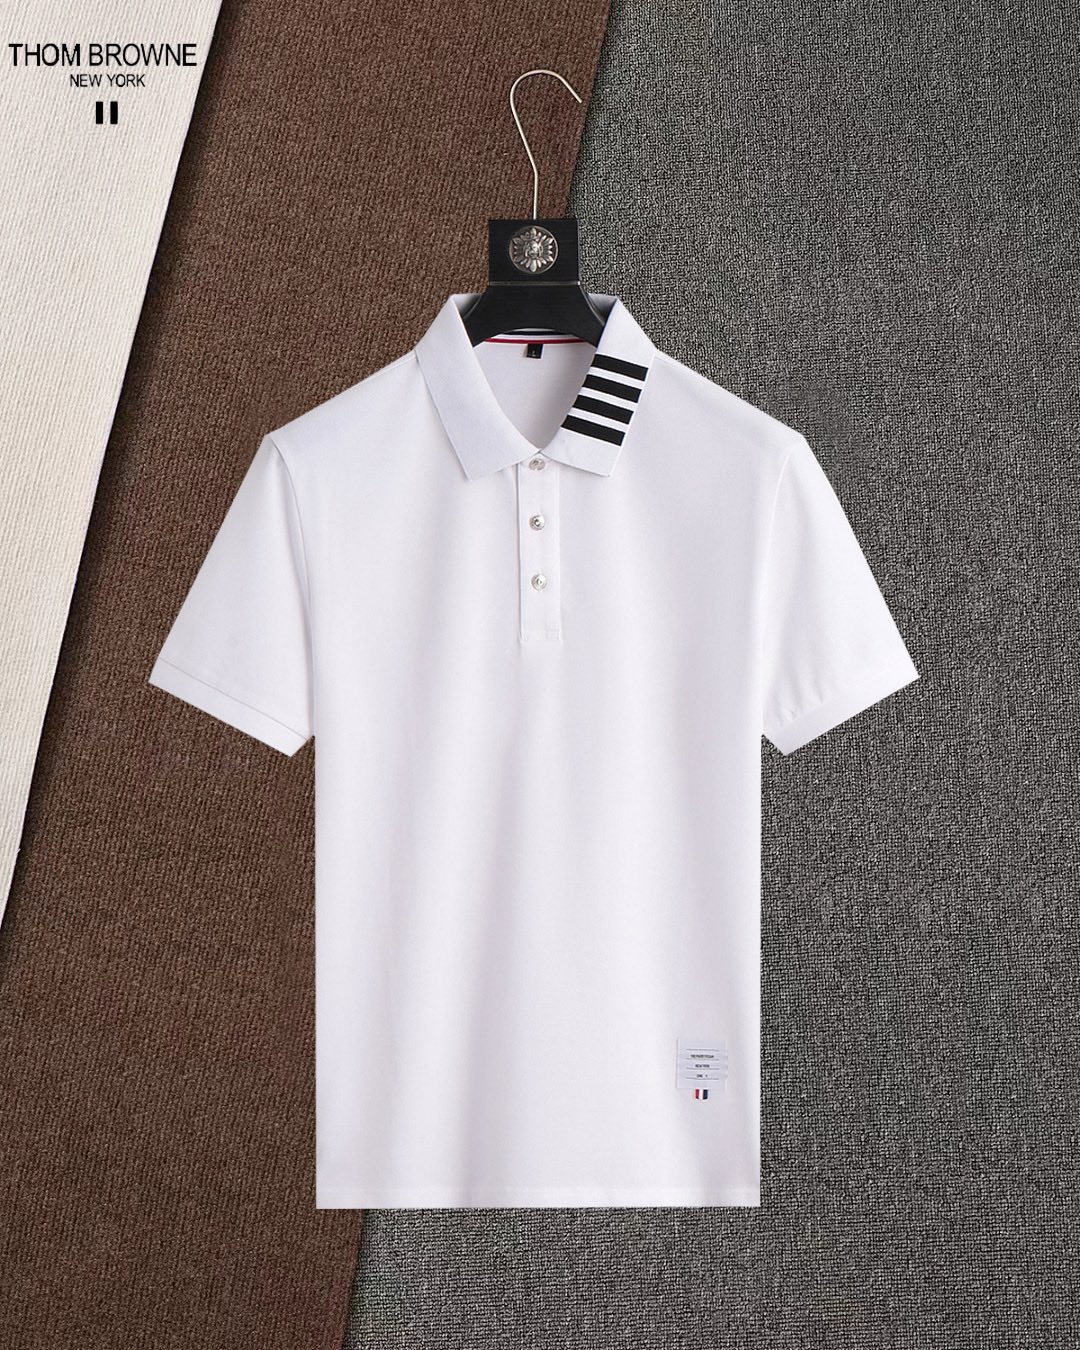 Thom Browne Flawless
 Clothing Polo Embroidery Cotton Summer Collection